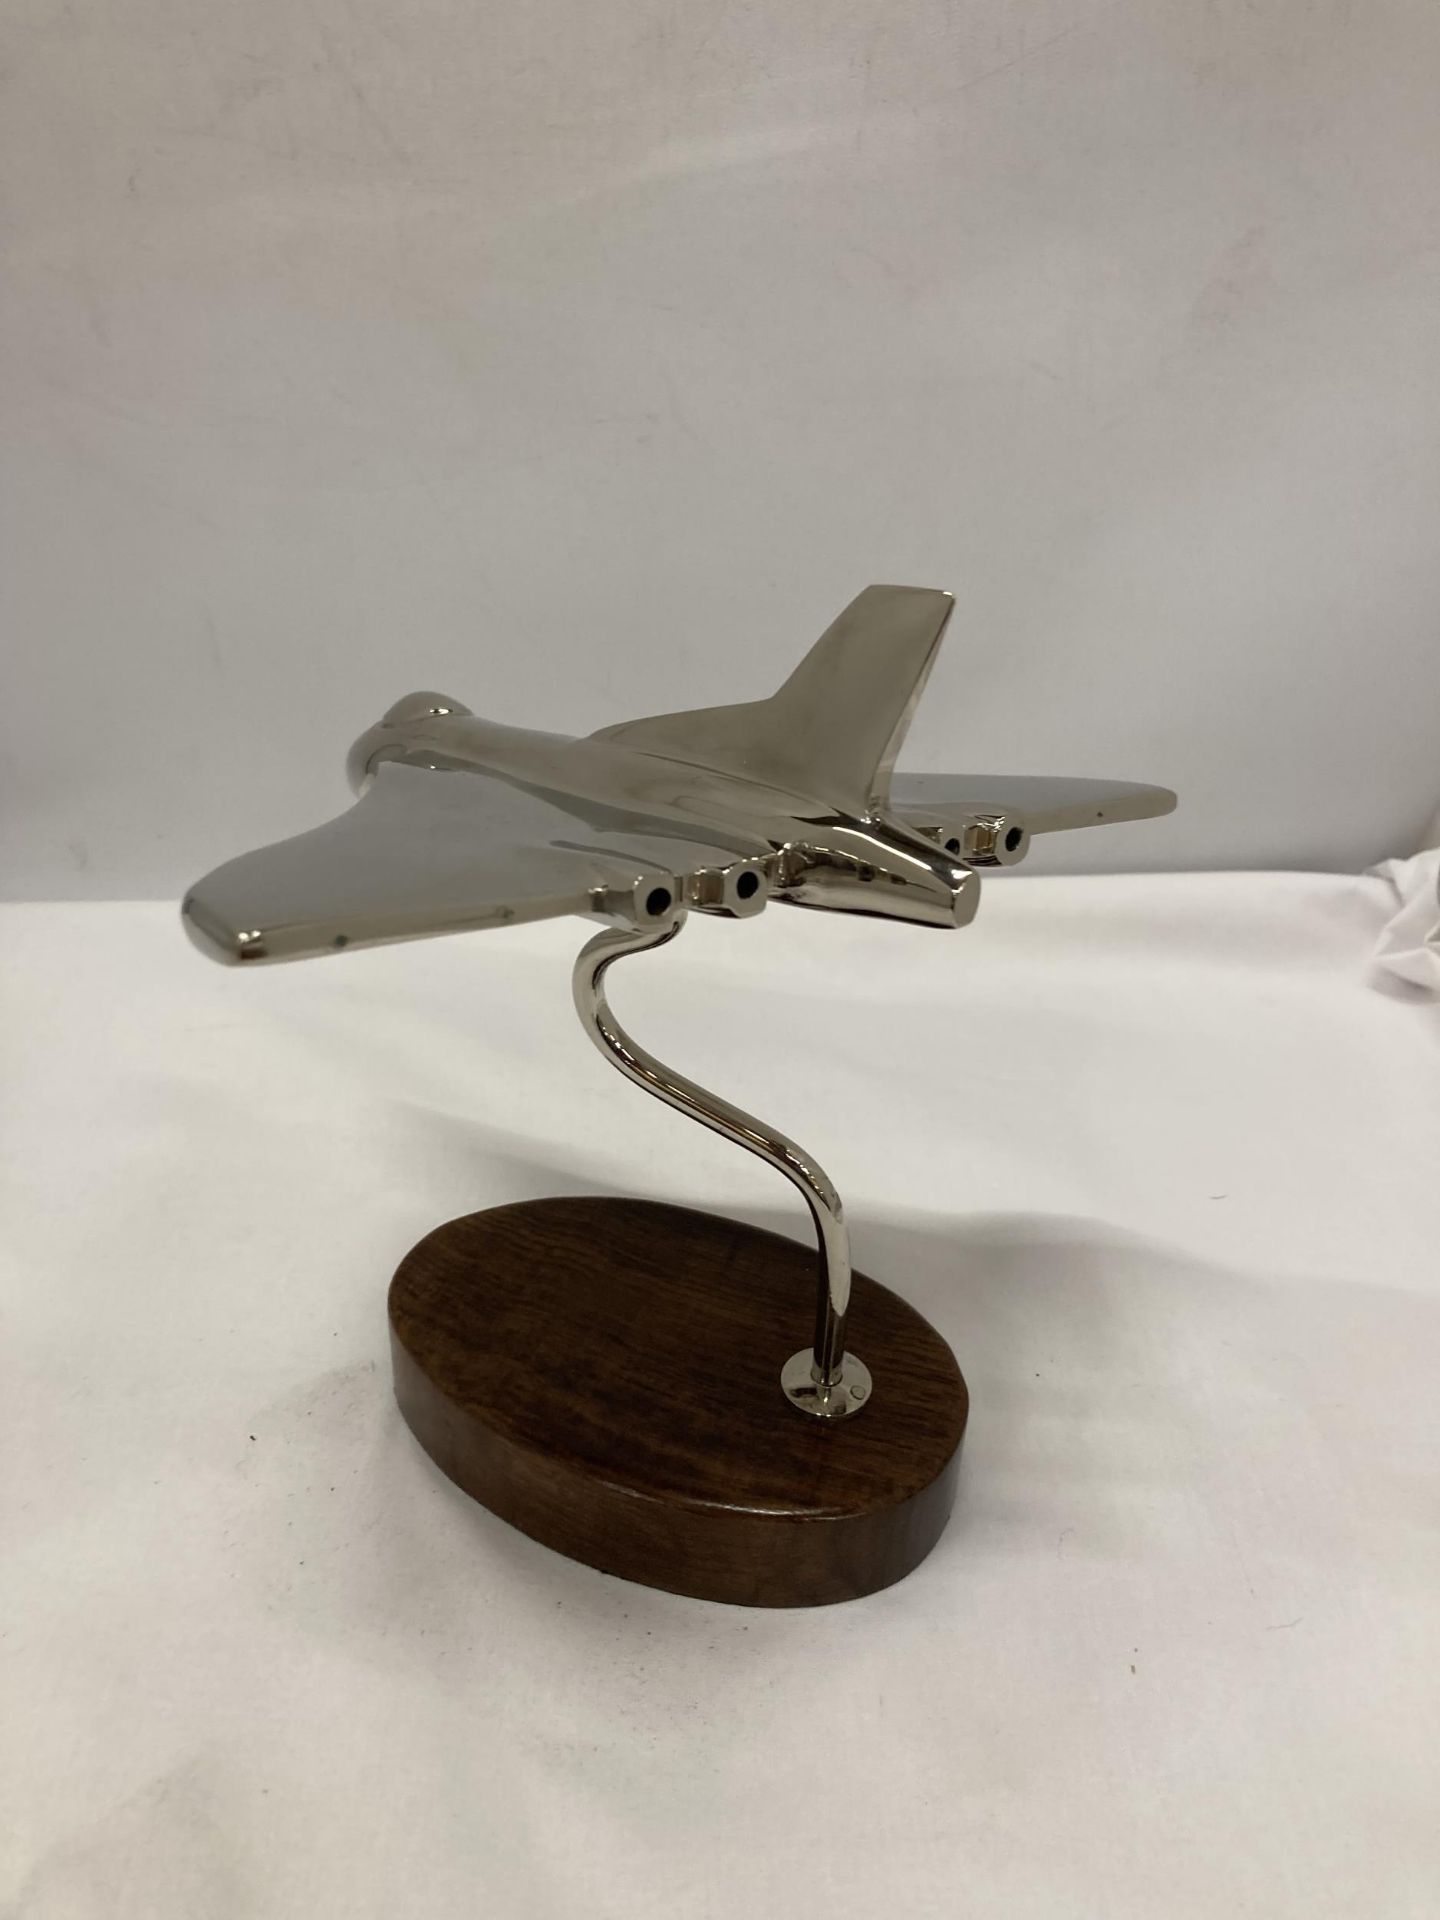 A CHROME VULCAN BOMBER ON WOODEN BASE - Image 3 of 3